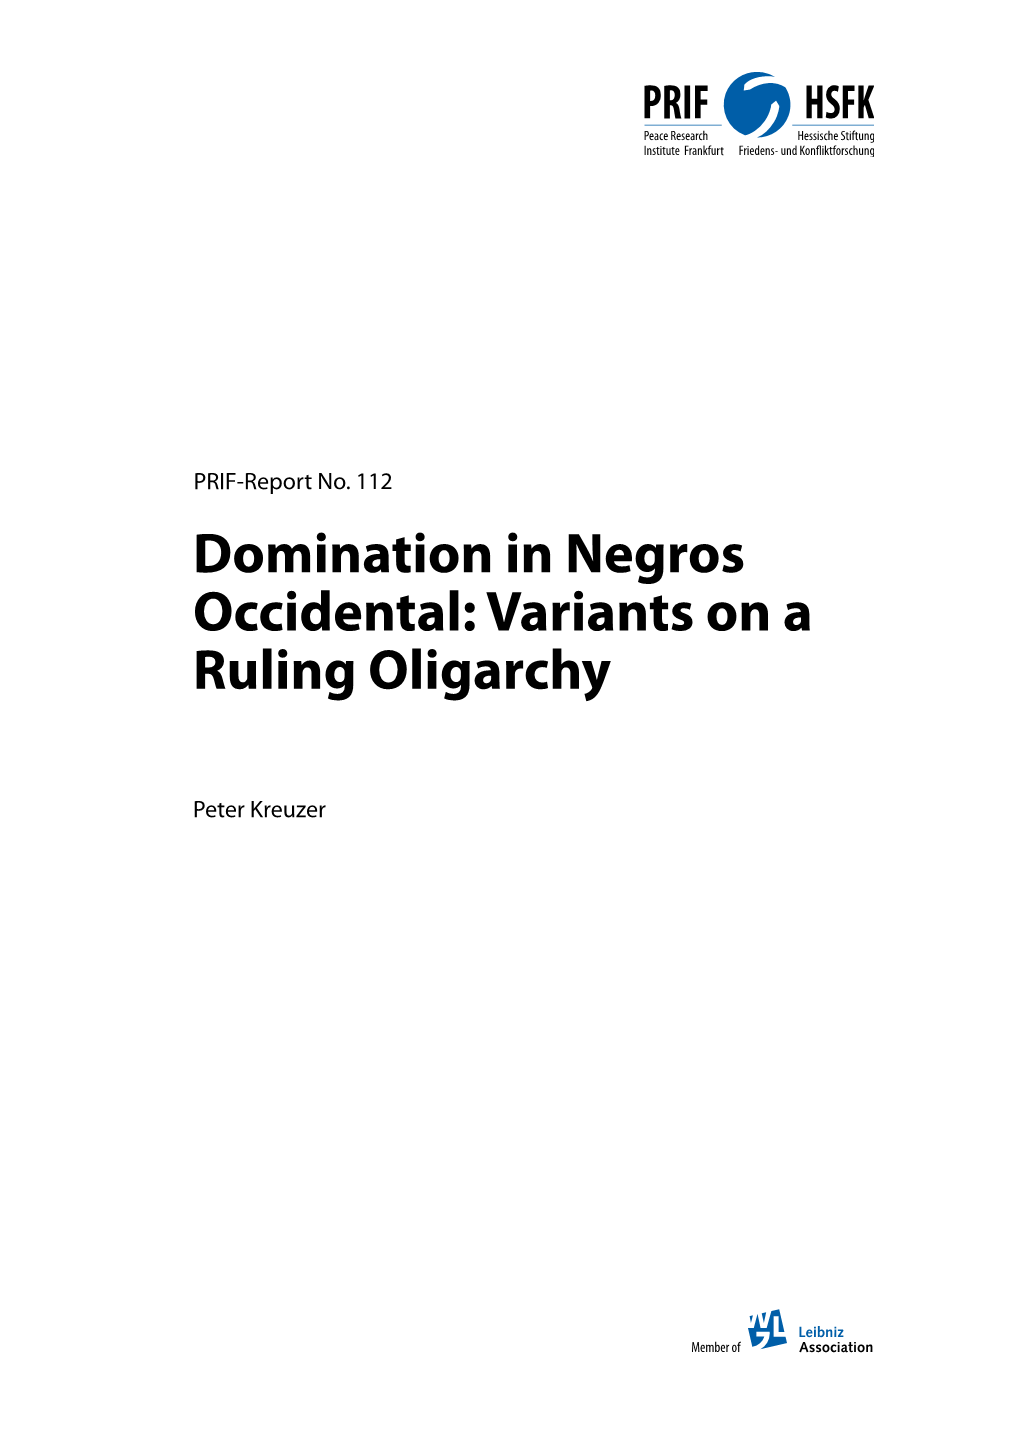 Domination in Negros Occidental: Variants on a Ruling Oligarchy